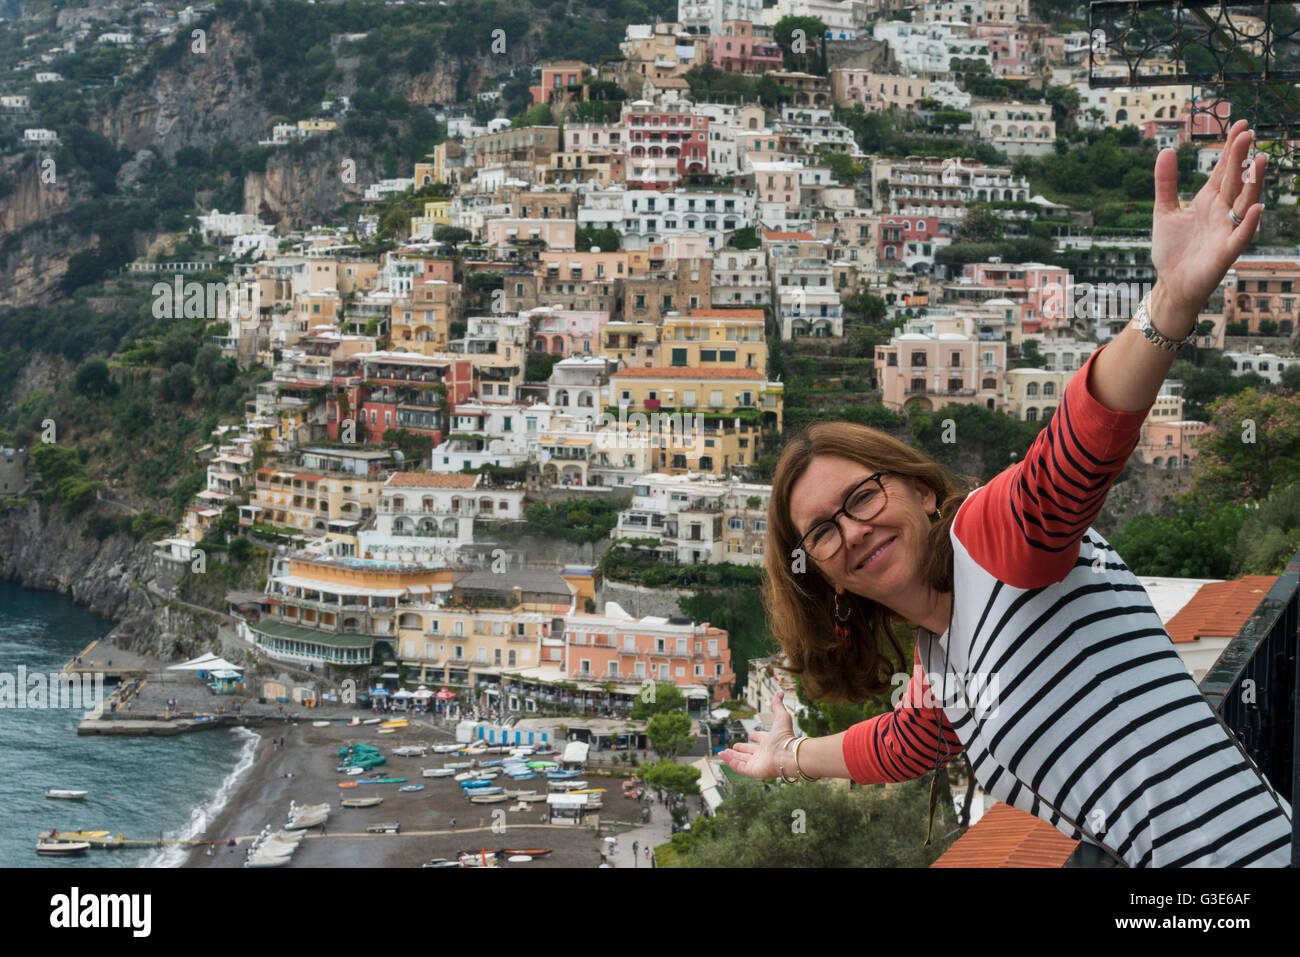 A woman posing with a view of the buildings along the Amalfi Coast; Positano, Campania, Italy Stock Photo